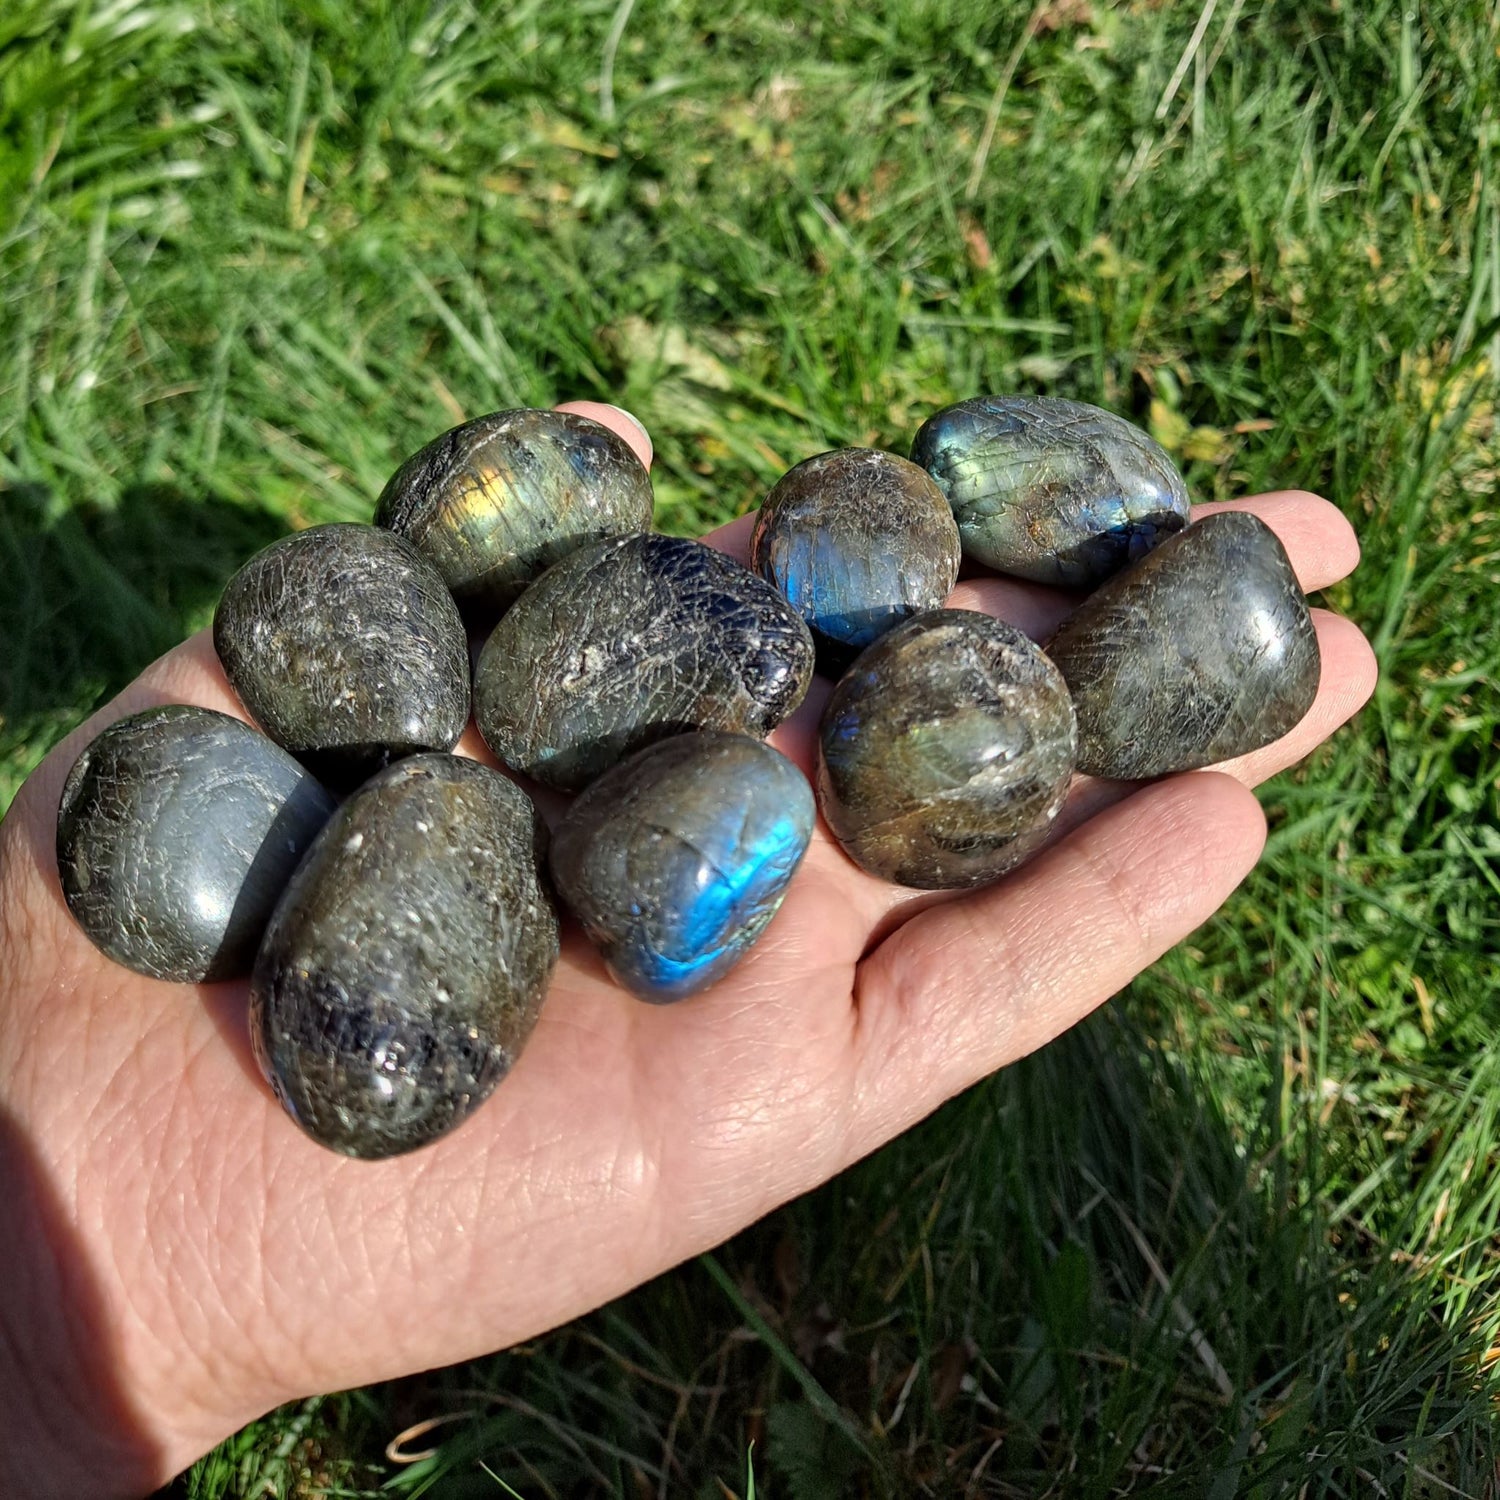 on a hand labradorite tumbled crystals, green grass in the background 